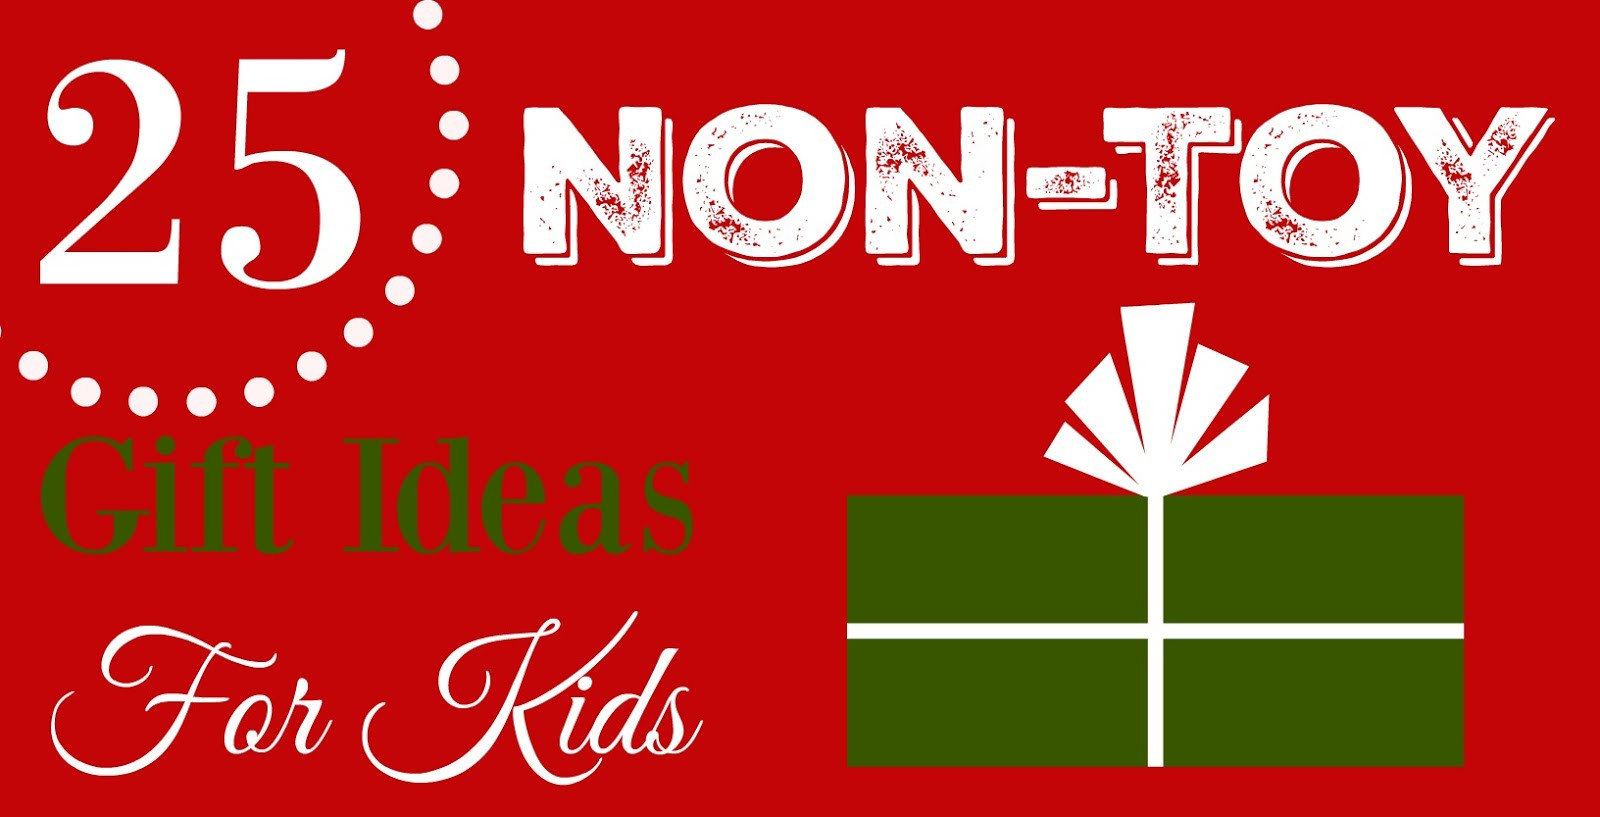 Gifts For Kids Not Toys
 25 Non Toy Gift Ideas For Kids The Pistachio Project